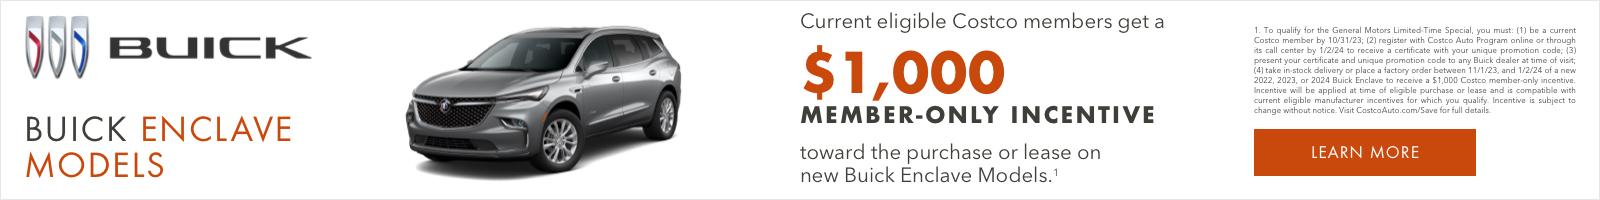 CURRENT ELIGIBLE COSTCO MEMBERS GET A
$1,000 MEMBER-ONLY INCENTIVE
TOWARD THE PURCHASE OR LEASE
ON NEW BUICK ENCLAVE MODELS1